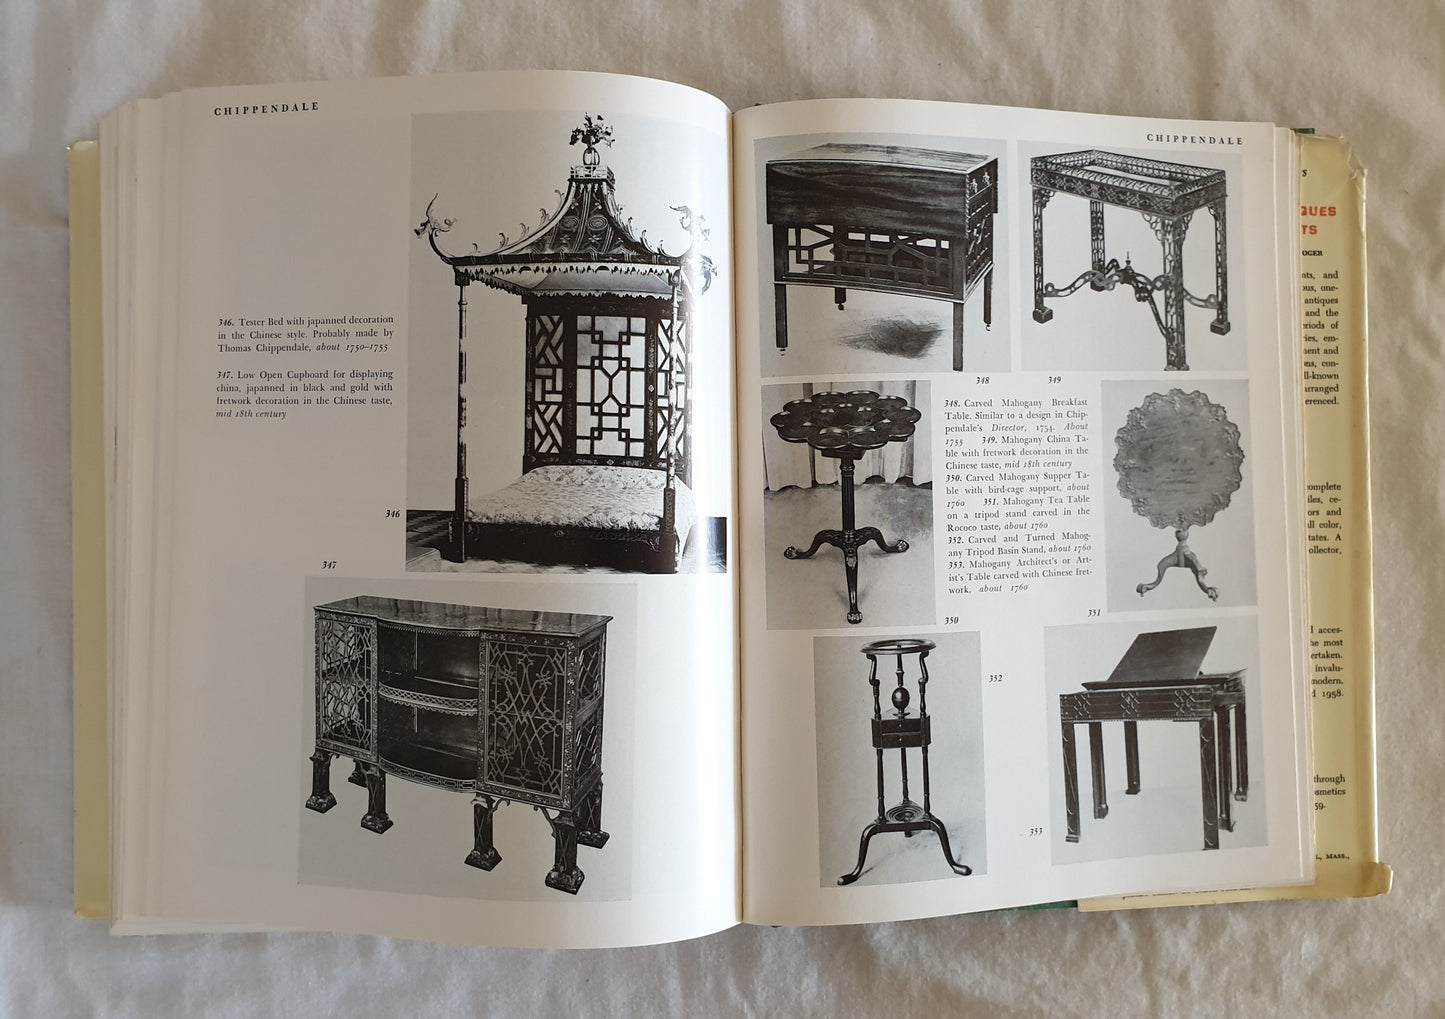 The Complete Guide to Furniture Styles by Louise Ade Boger